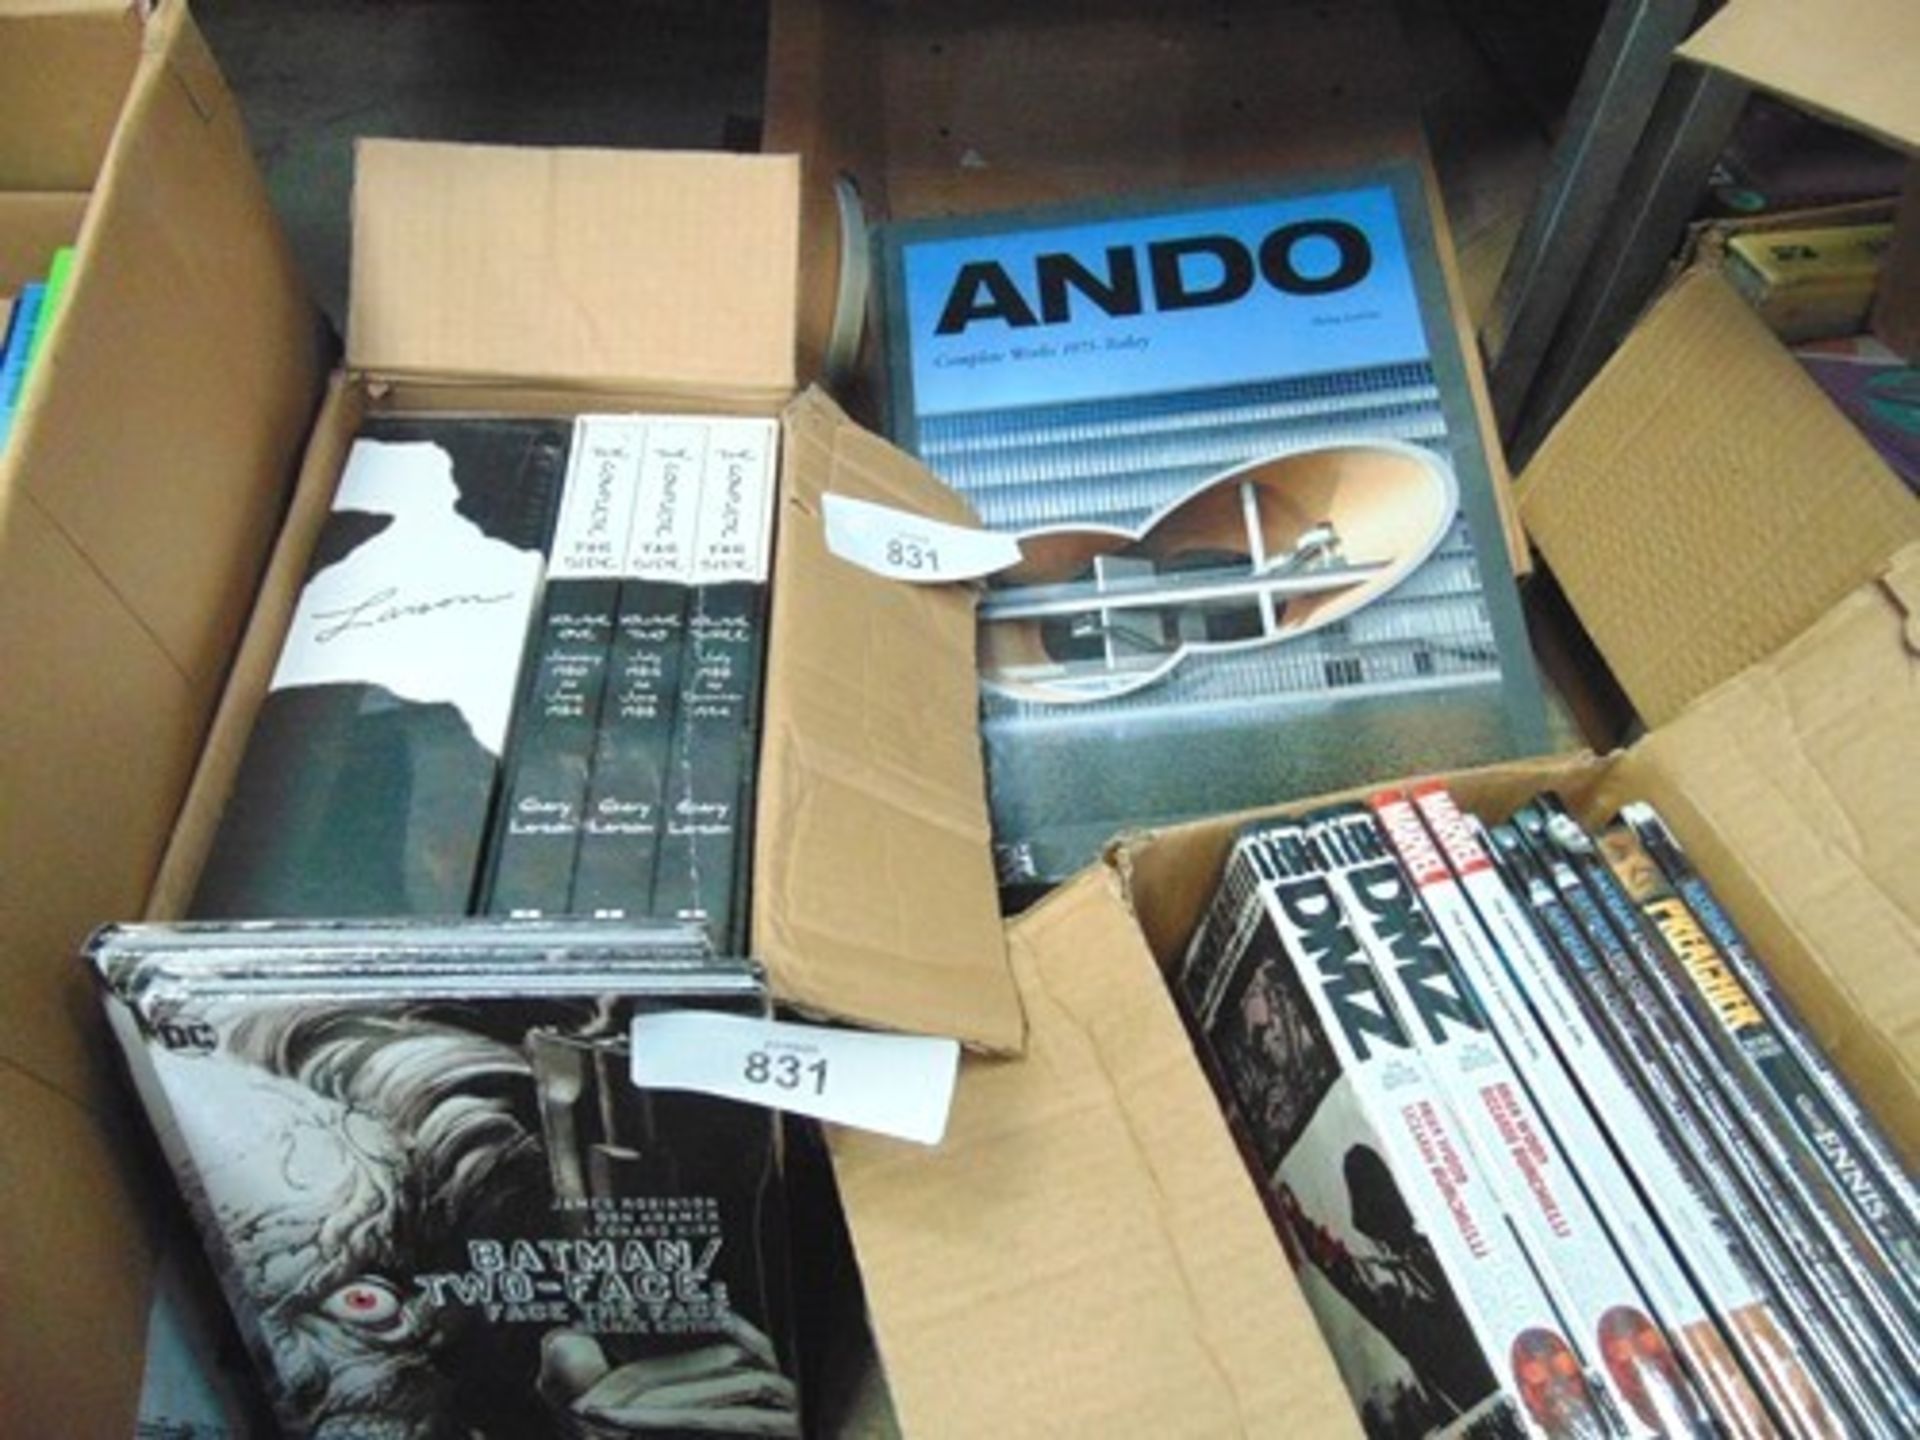 A copy of Ando Complete Works 1975 - Today by Philip Jodidio, published by Taschen, 2 x The Complete